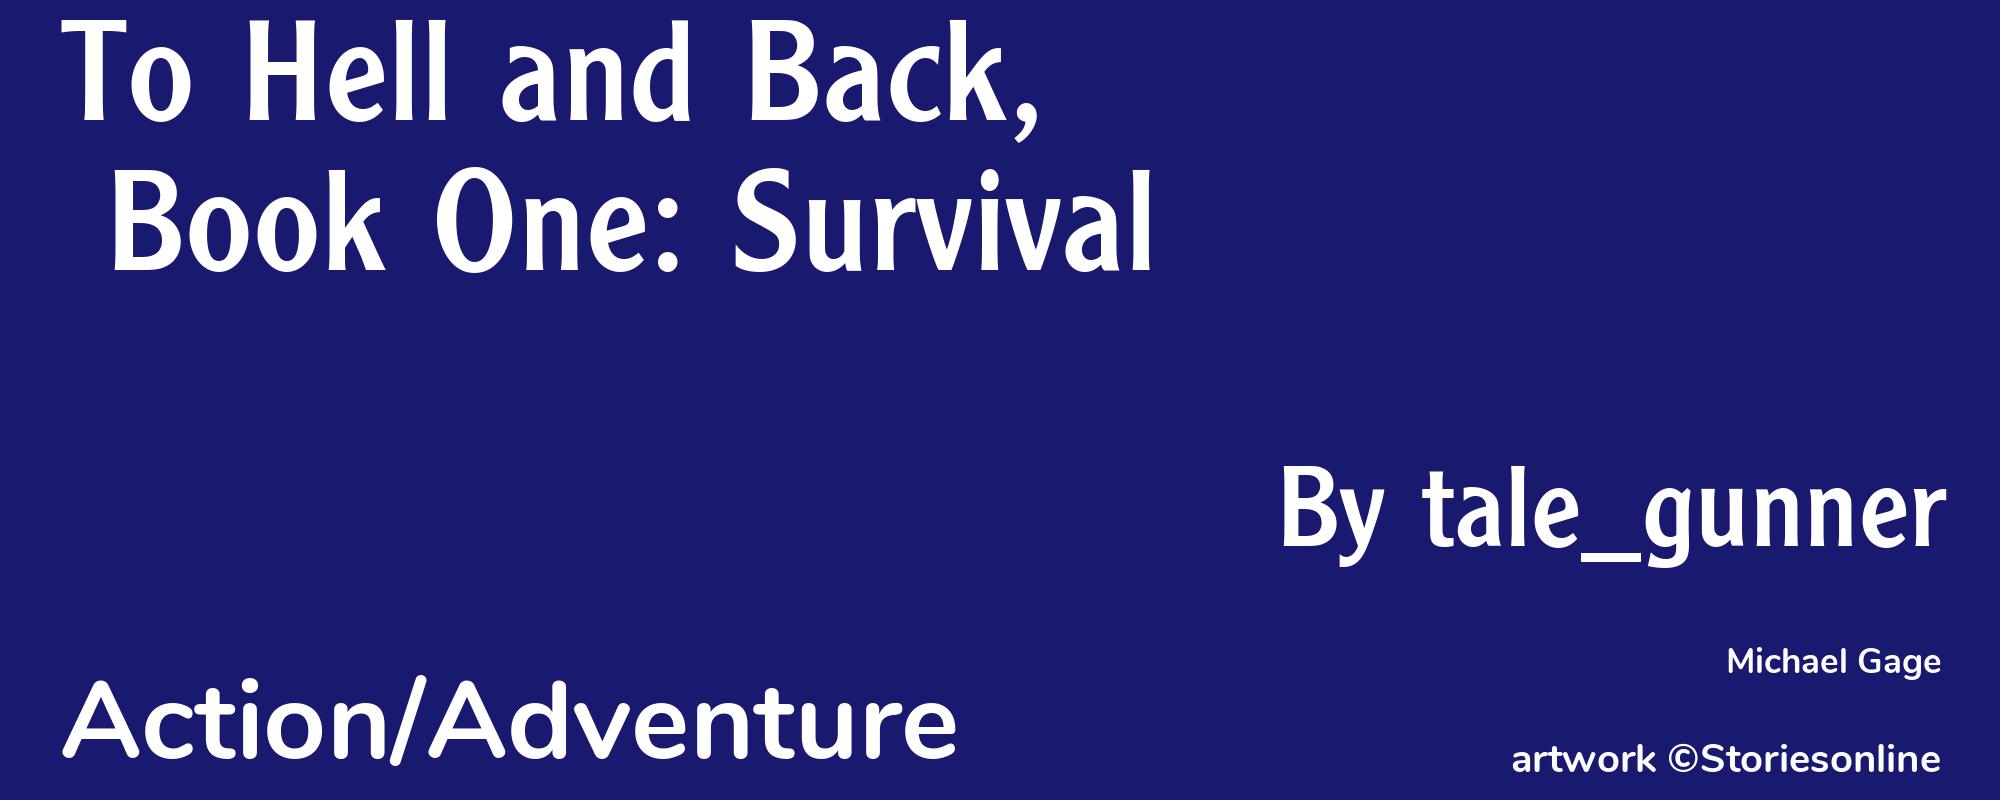 To Hell and Back, Book One: Survival - Cover